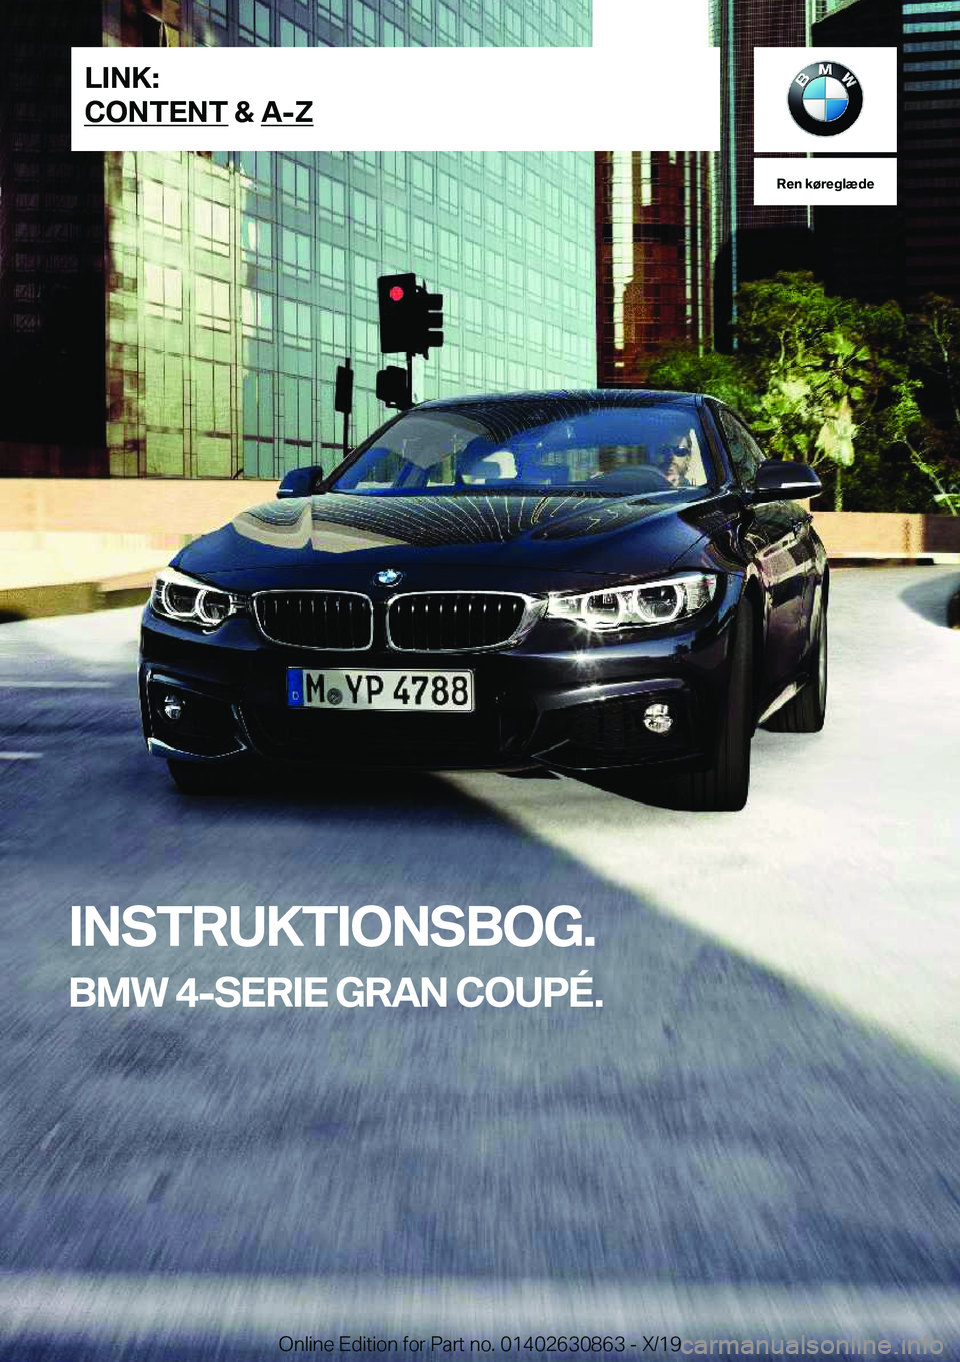 BMW 4 SERIES GRAN COUPE 2020  InstruktionsbØger (in Danish) �R�e�n��k�